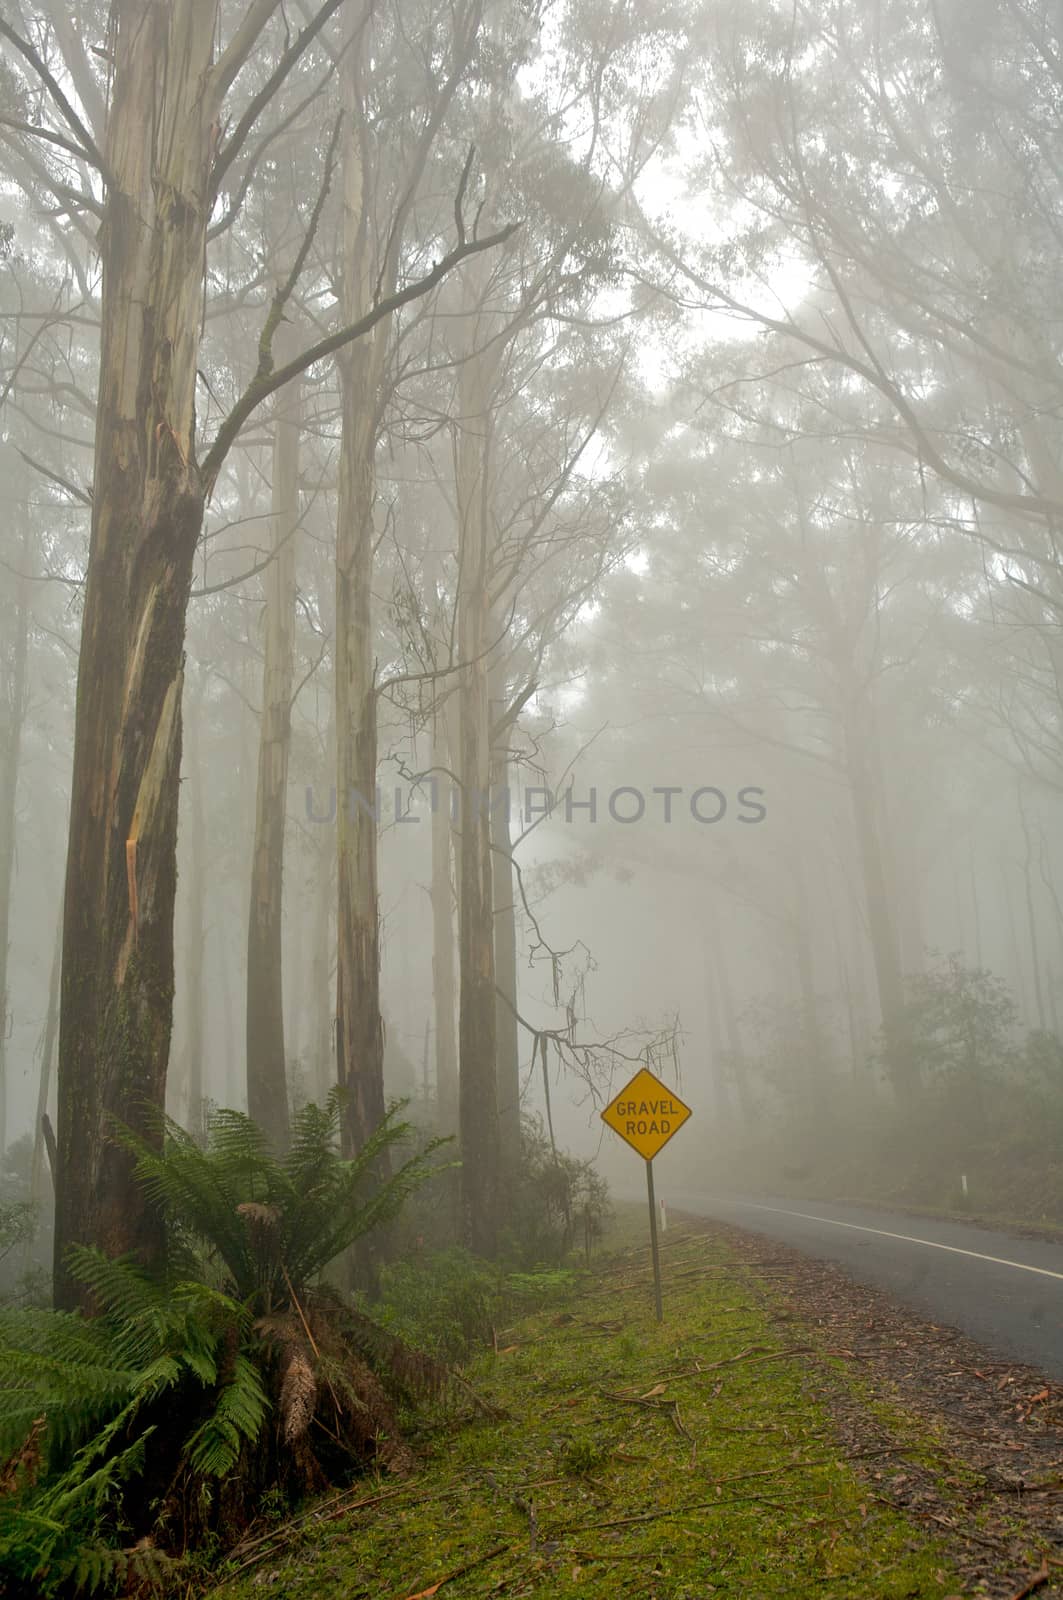 Misty drive thought the forrest  by instinia